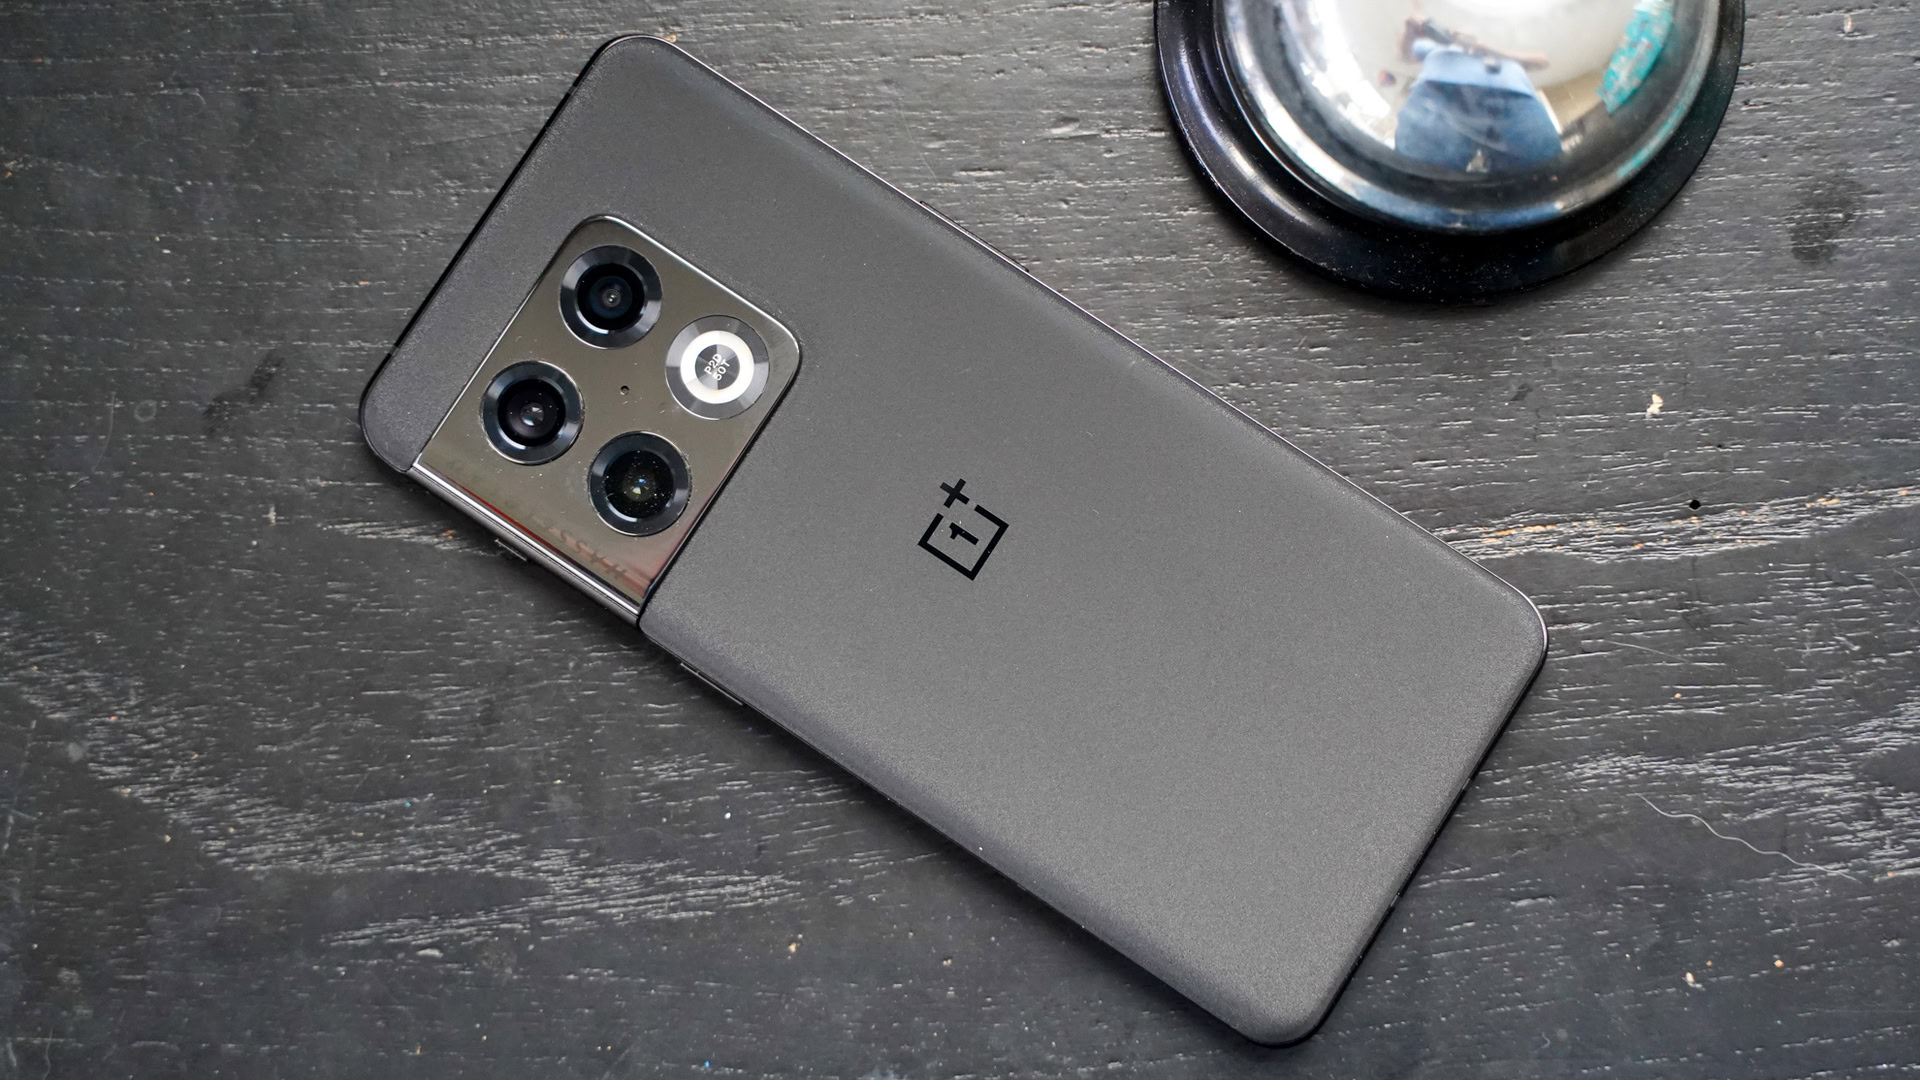 OnePlus 10 Pro Review: Are These Concerns the Story?